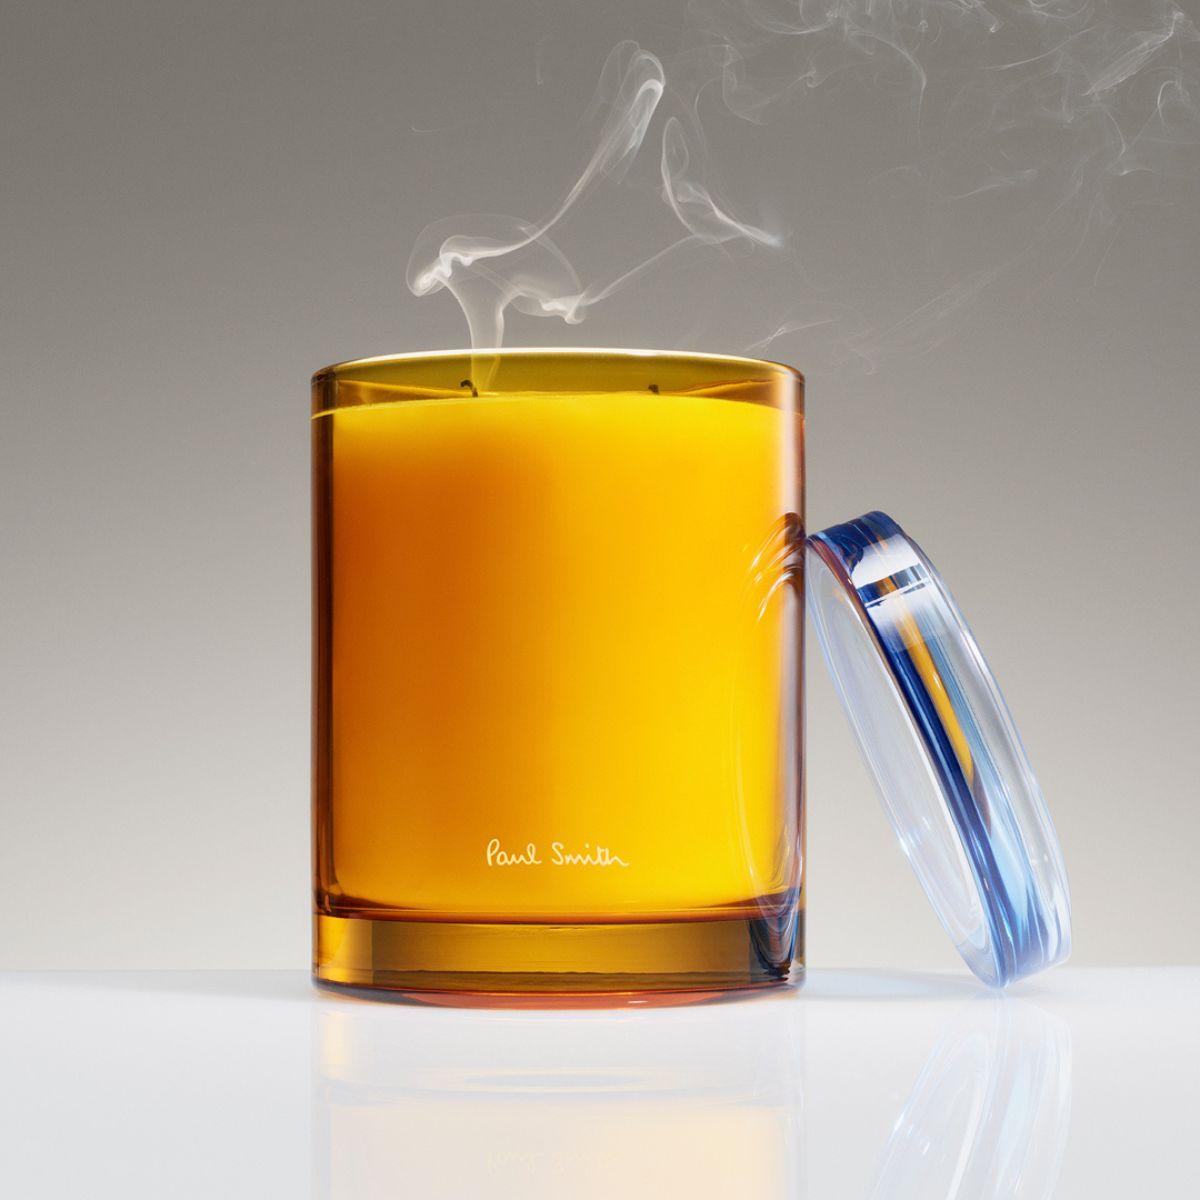 Image of Daydreamer scented candle by Paul Smith